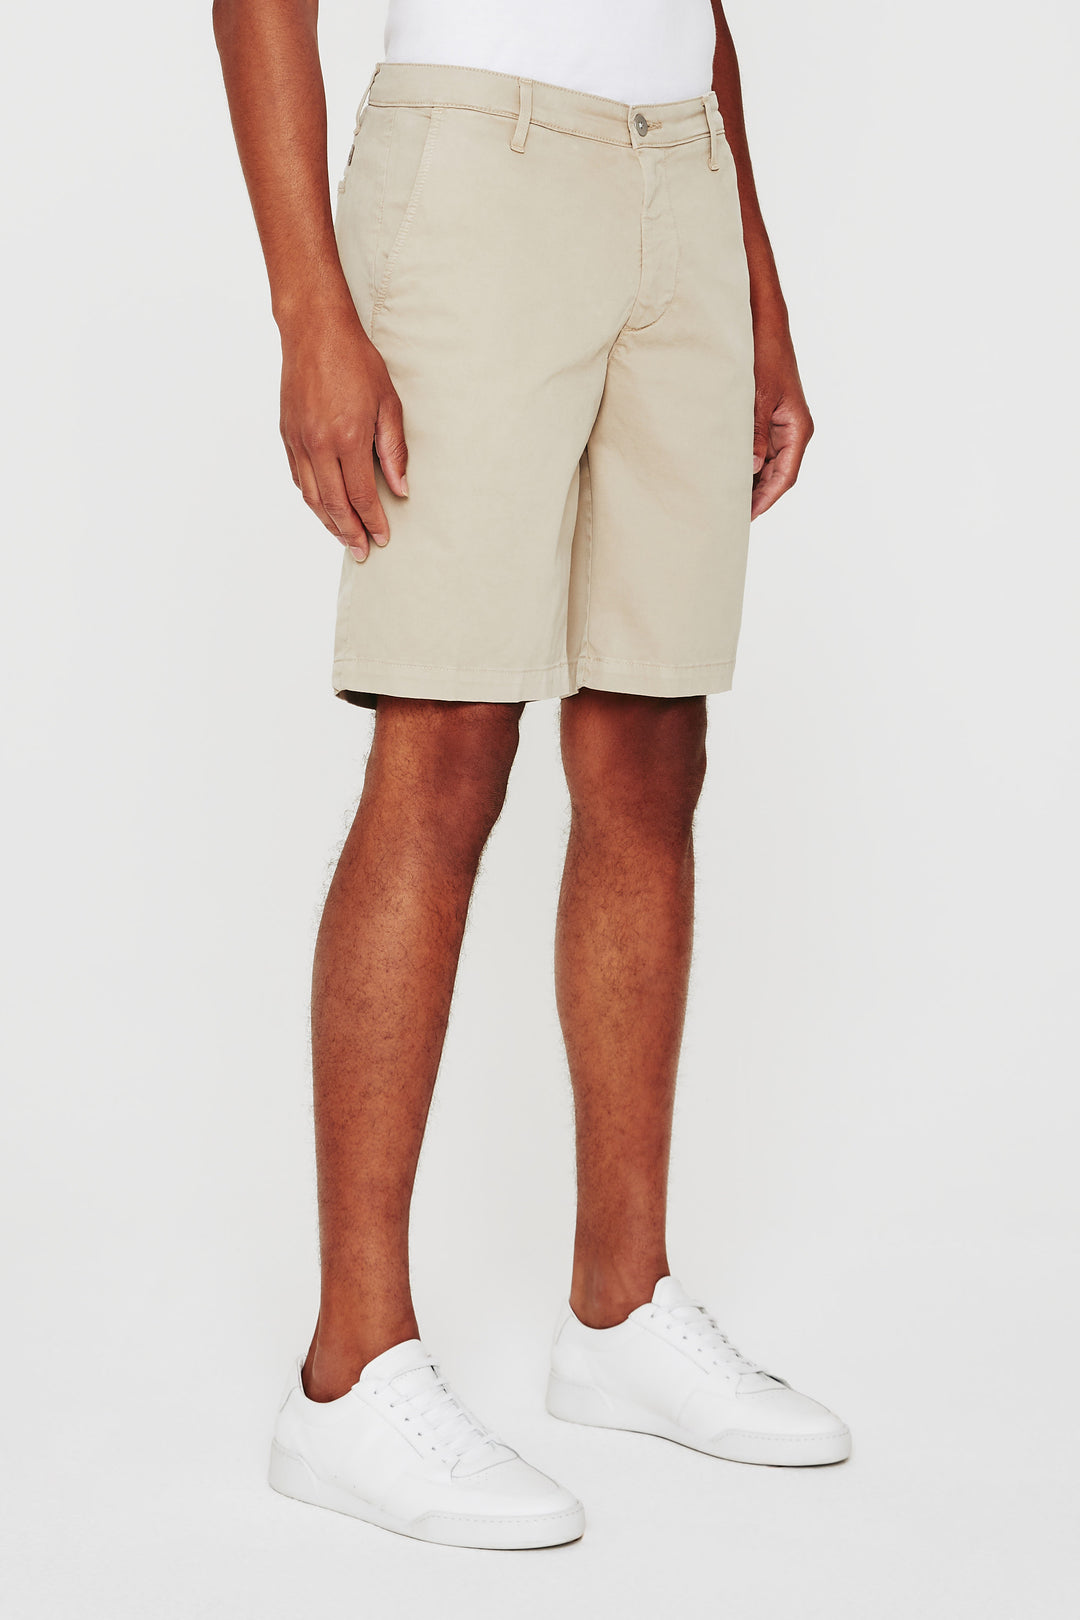 AG Mens - Griffin Tailored Shorts in Dry Dust